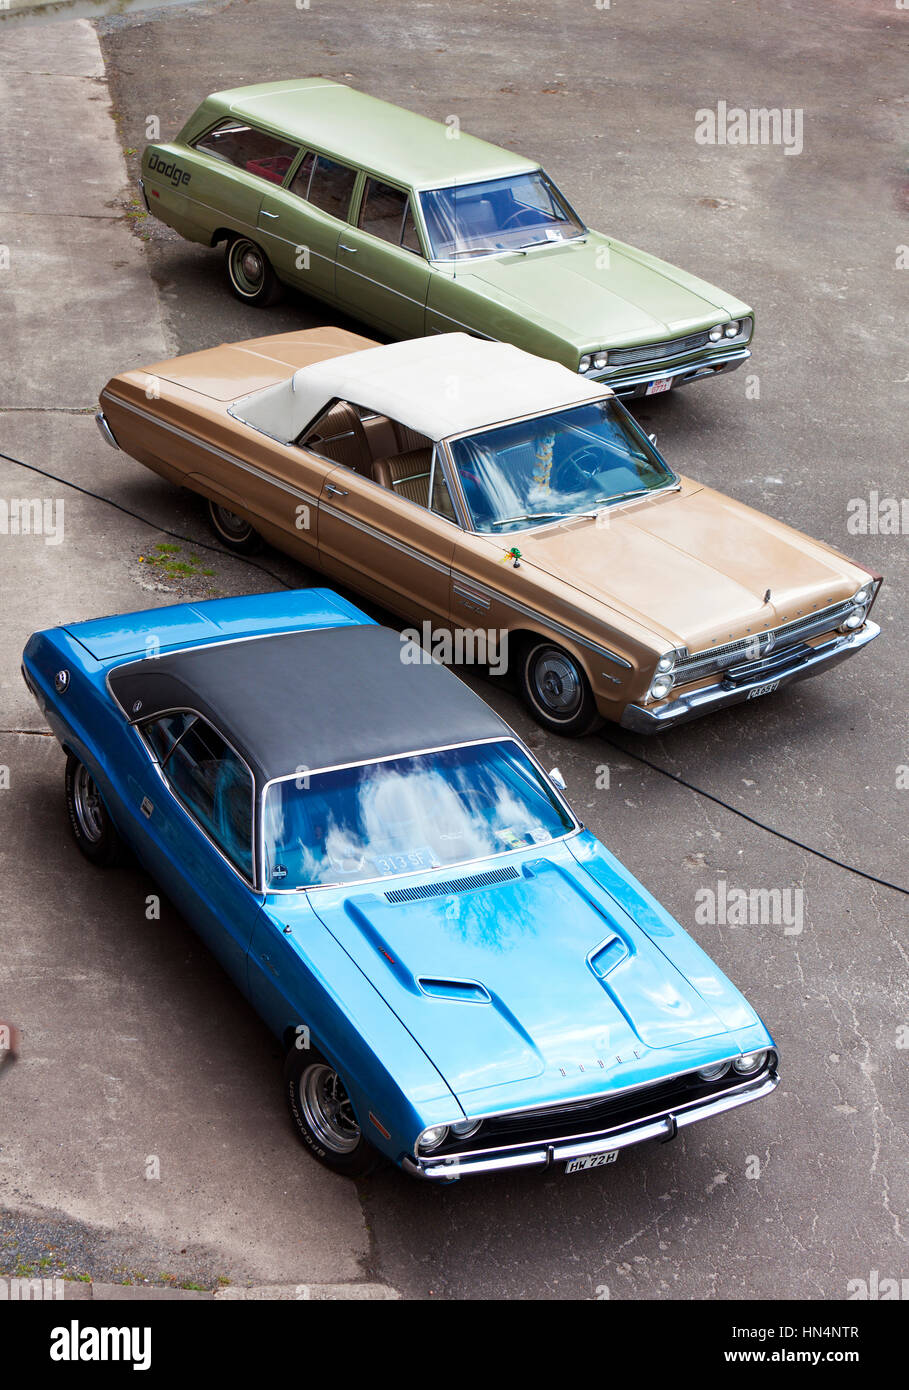 Stade, Germany - May 2, 2015: 1969 Dodge Coronet Station Wagon, 1965 Plymouth Sport Fury Convertible and 1972 Dodge Charger at MOPAR Spring Fling, ann Stock Photo